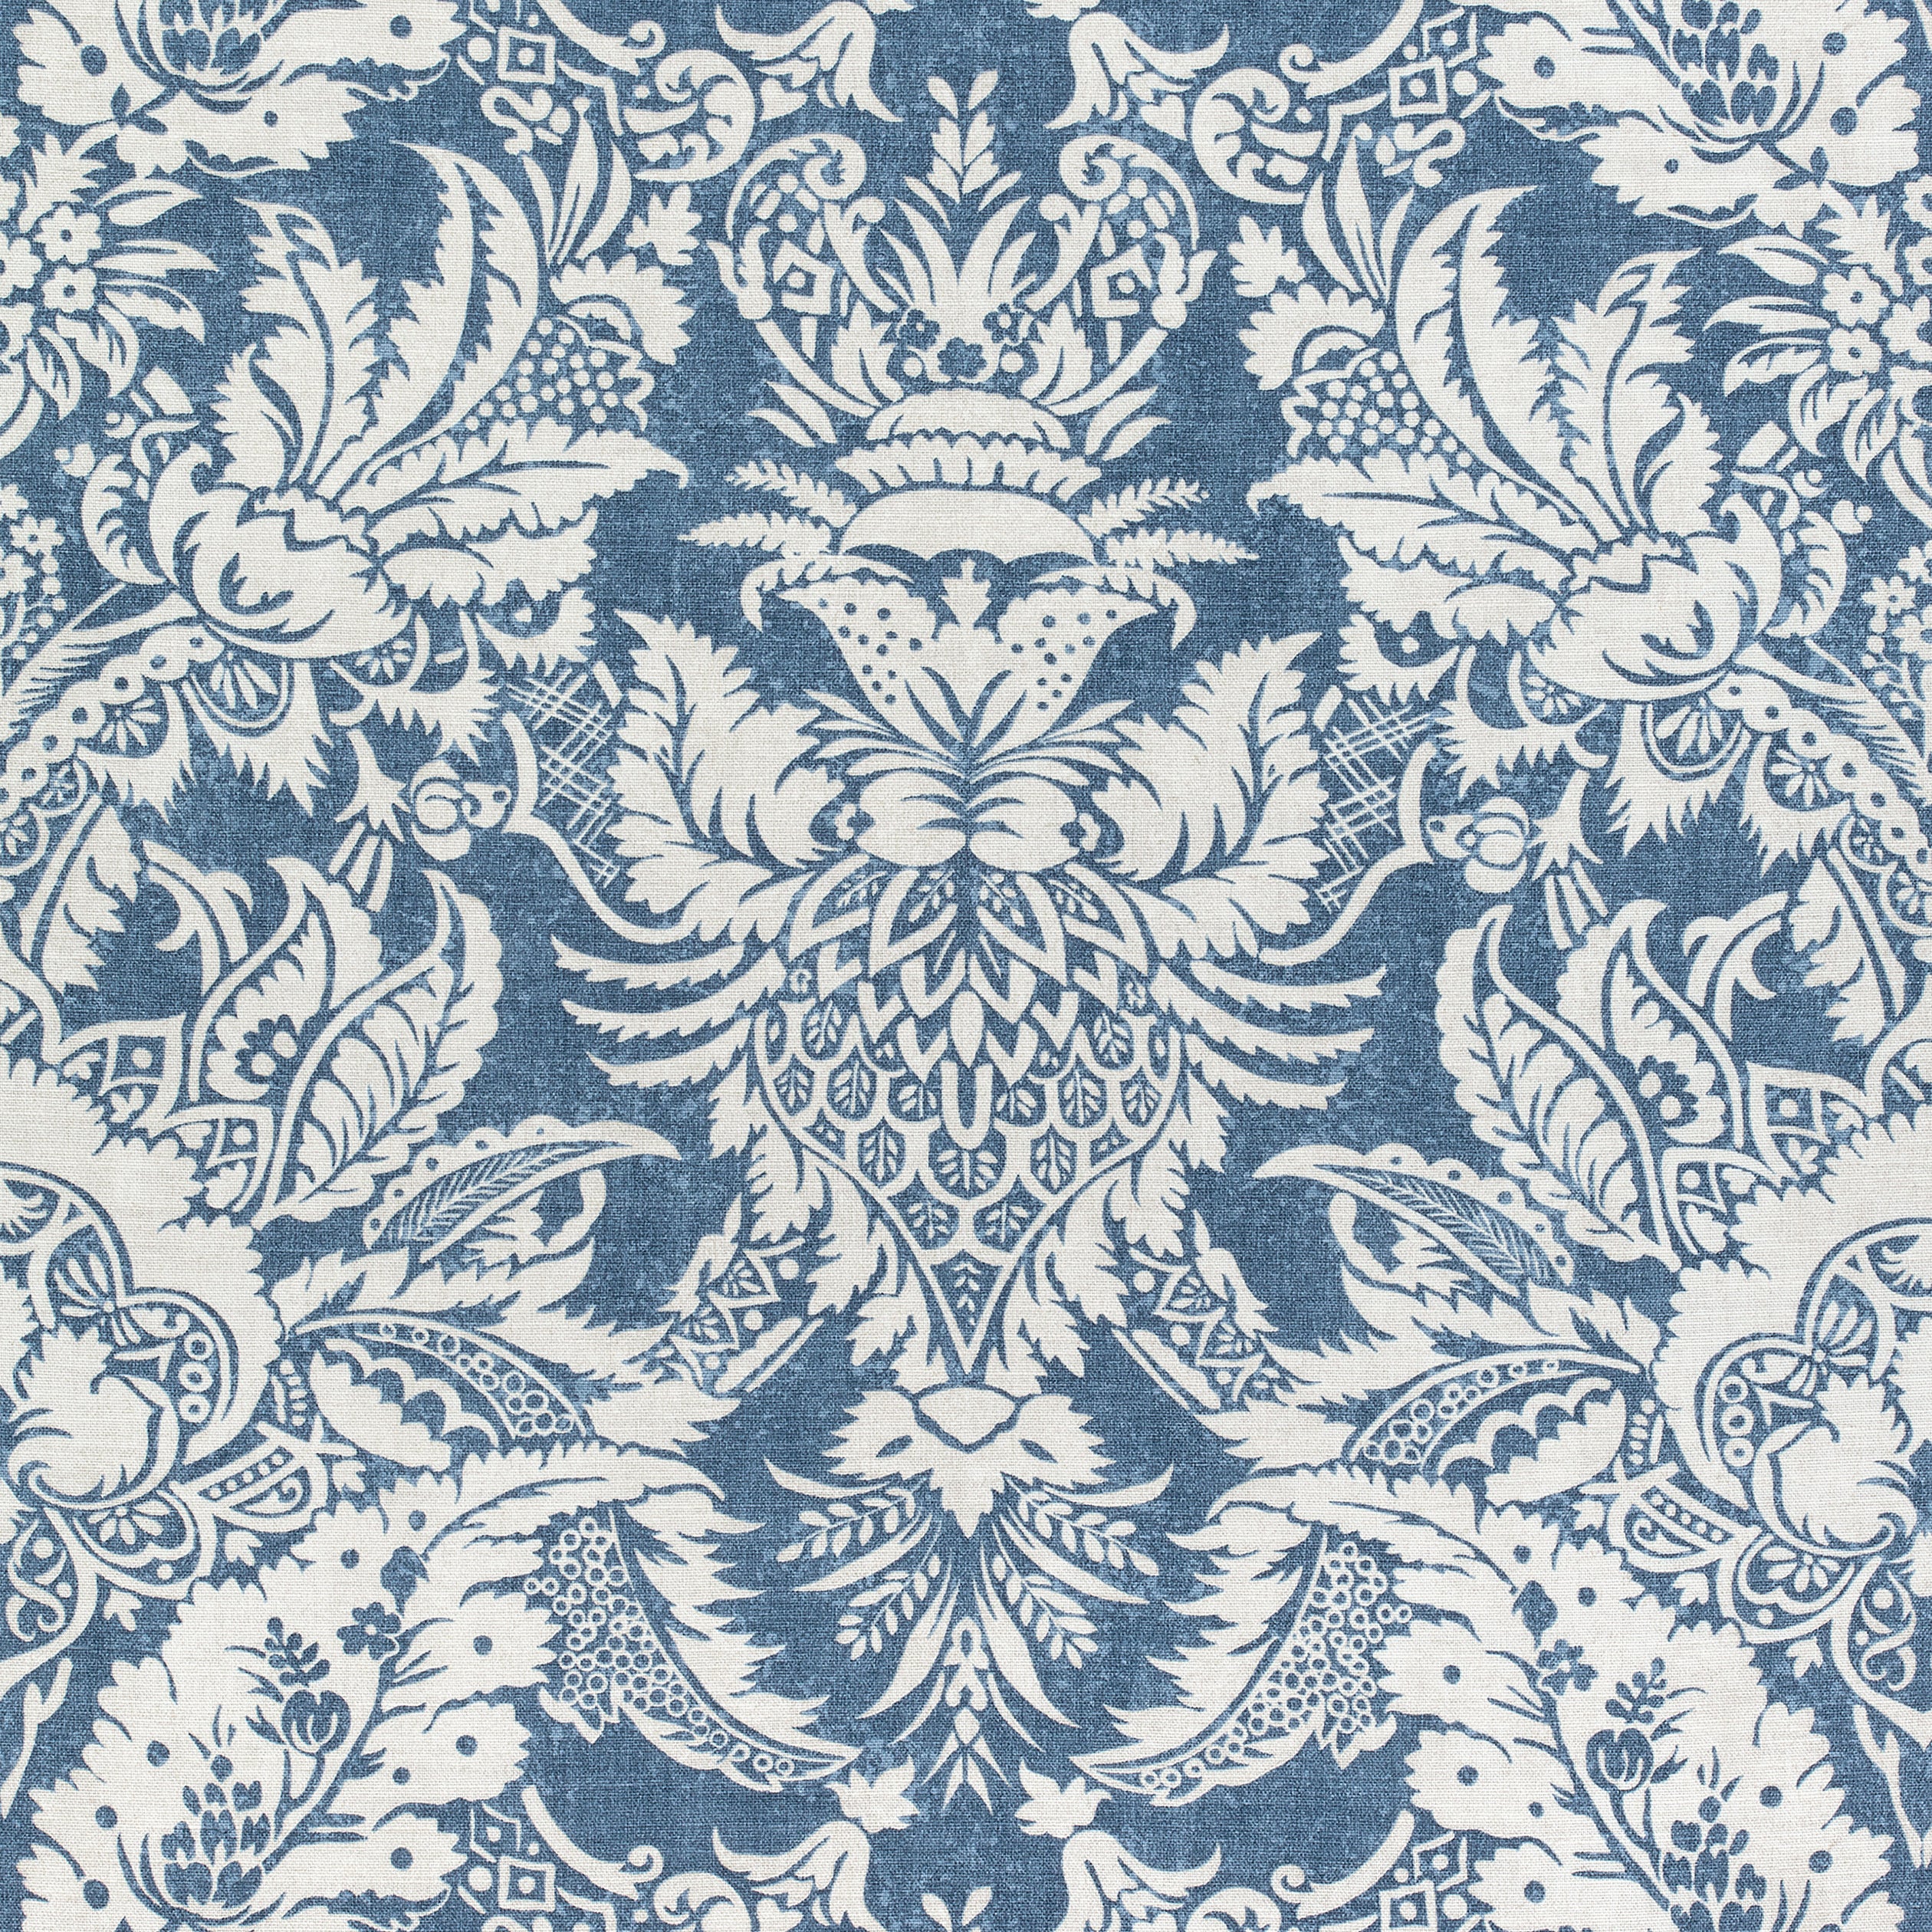 Chardonnet Damask fabric in navy color - pattern number F972583 - by Thibaut in the Chestnut Hill collection